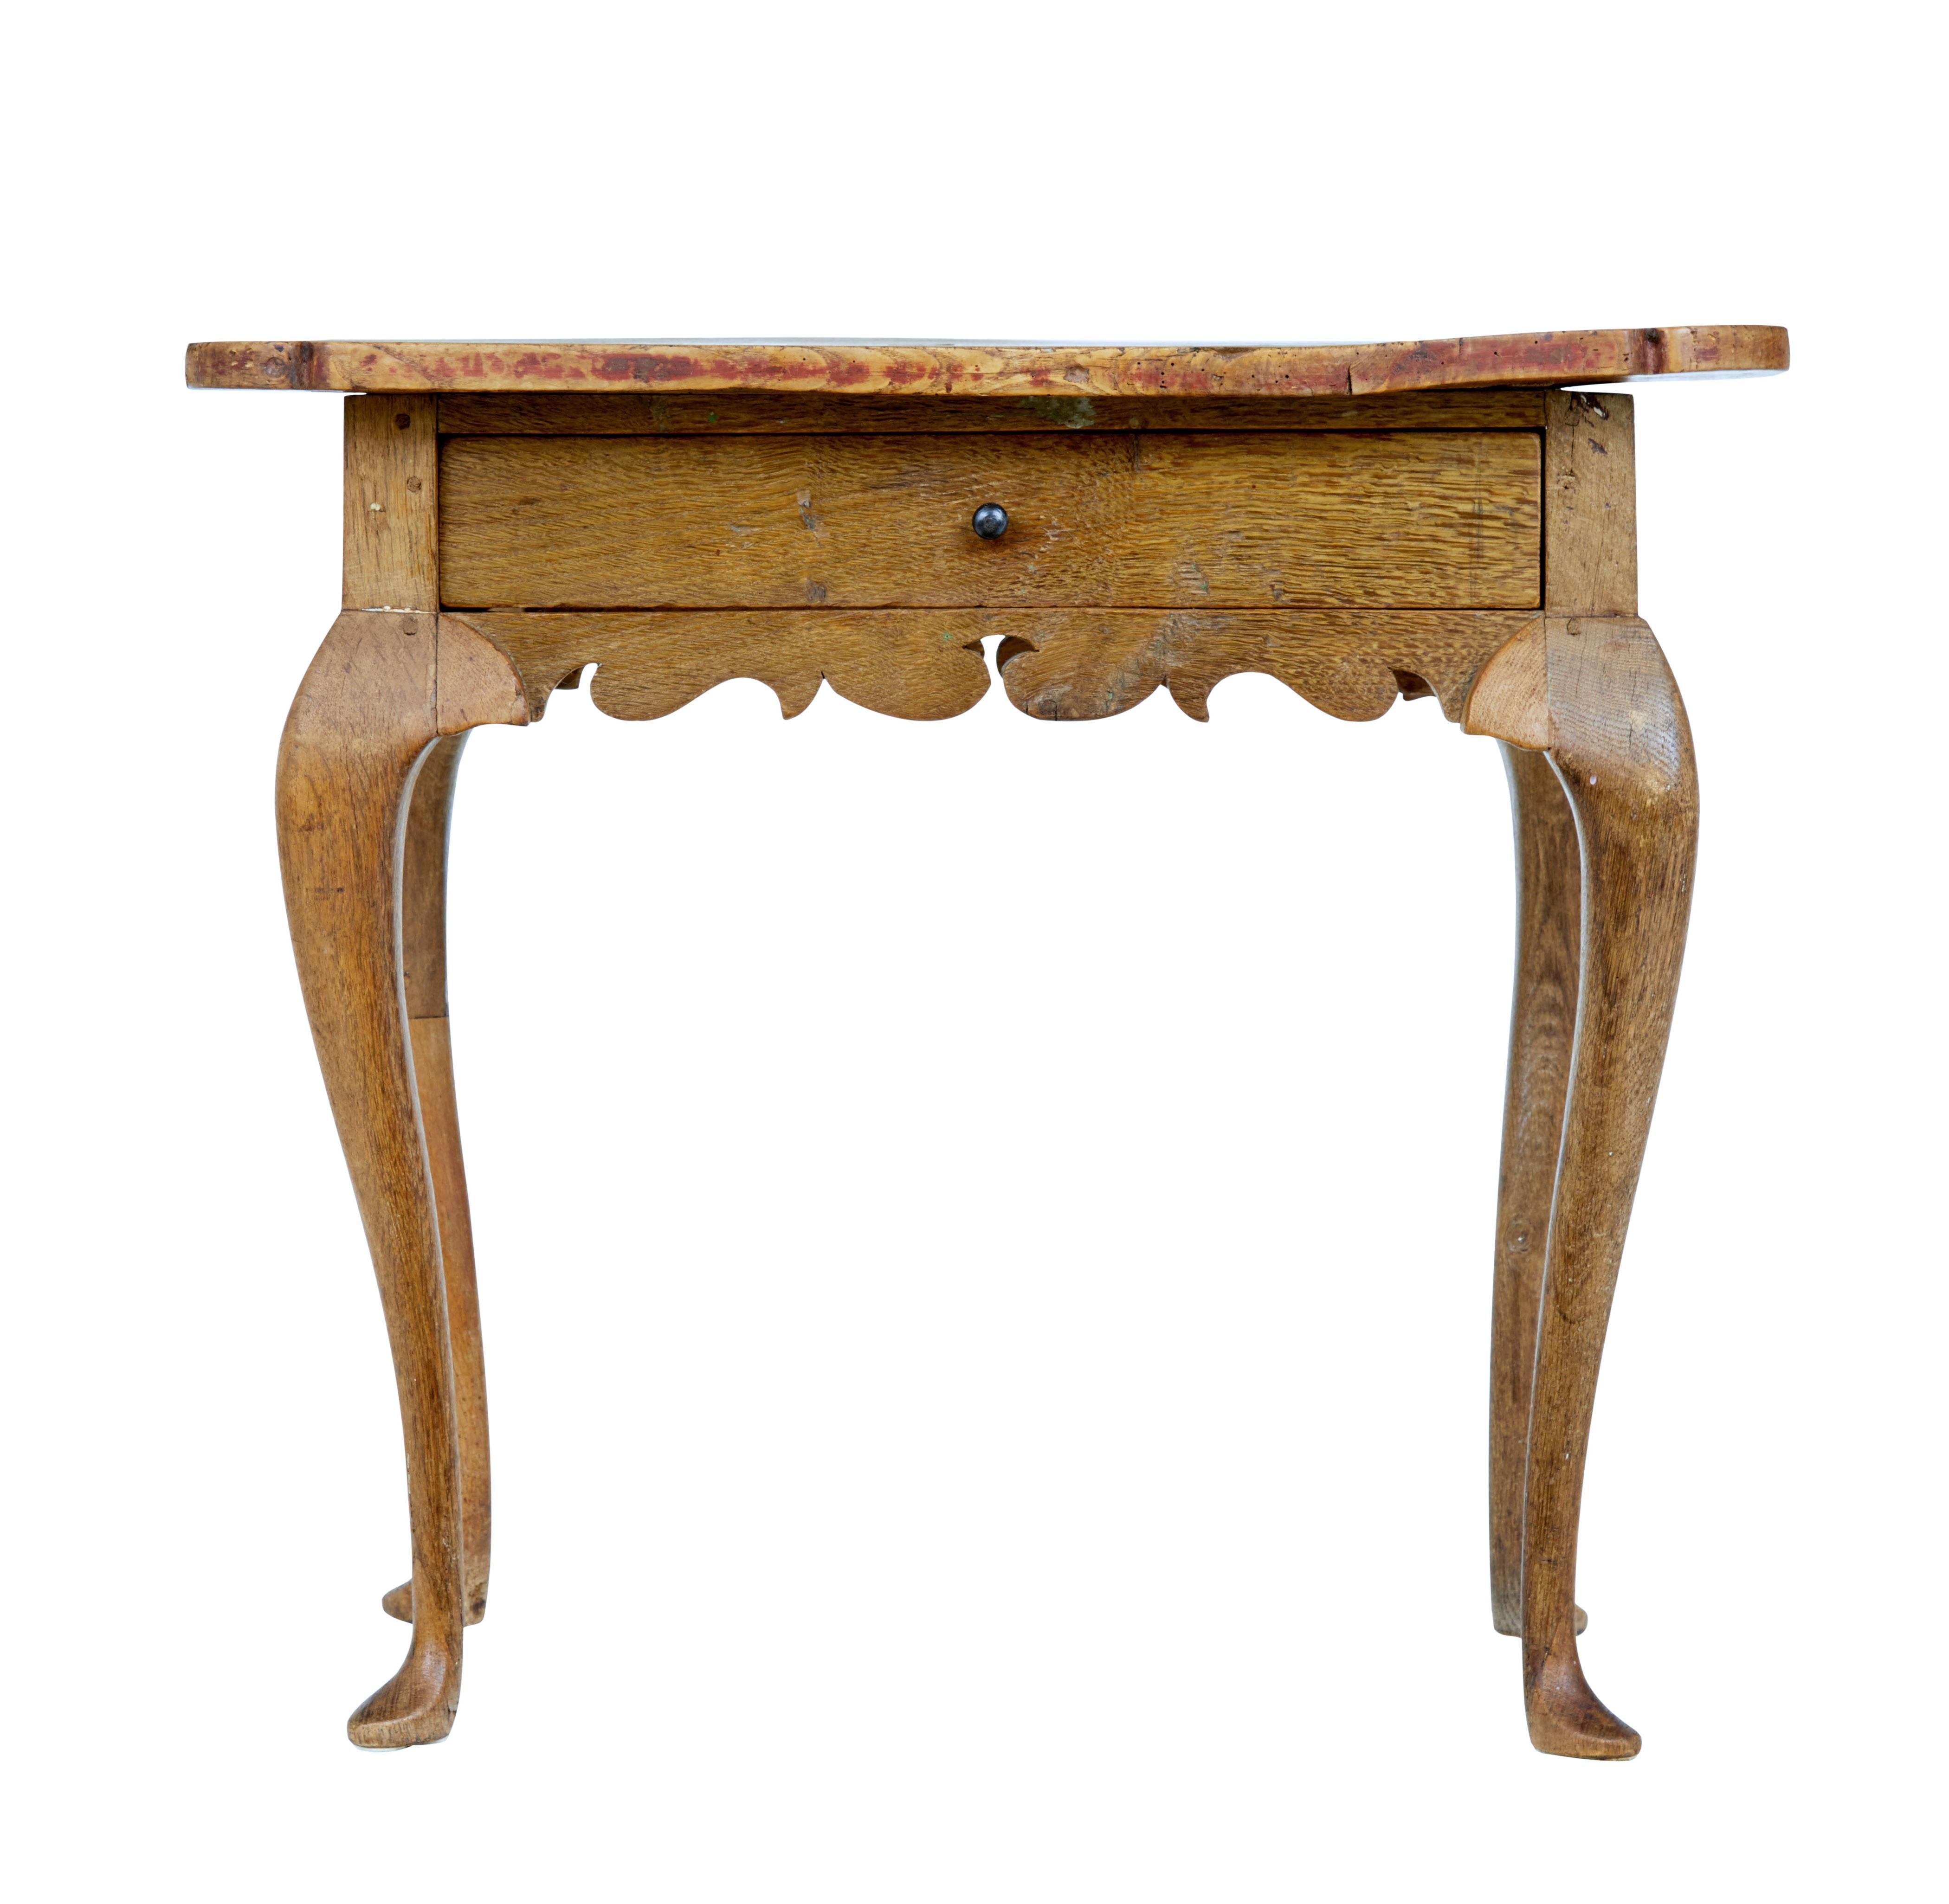 18th century Rococo period elm side table circa 1770.

Swedish table with over sailing burr top, single drawer below the top surface. Carved frieze which link to the cabriole legs and pad foot.

One 19th century restoration to 1 leg. Obvious